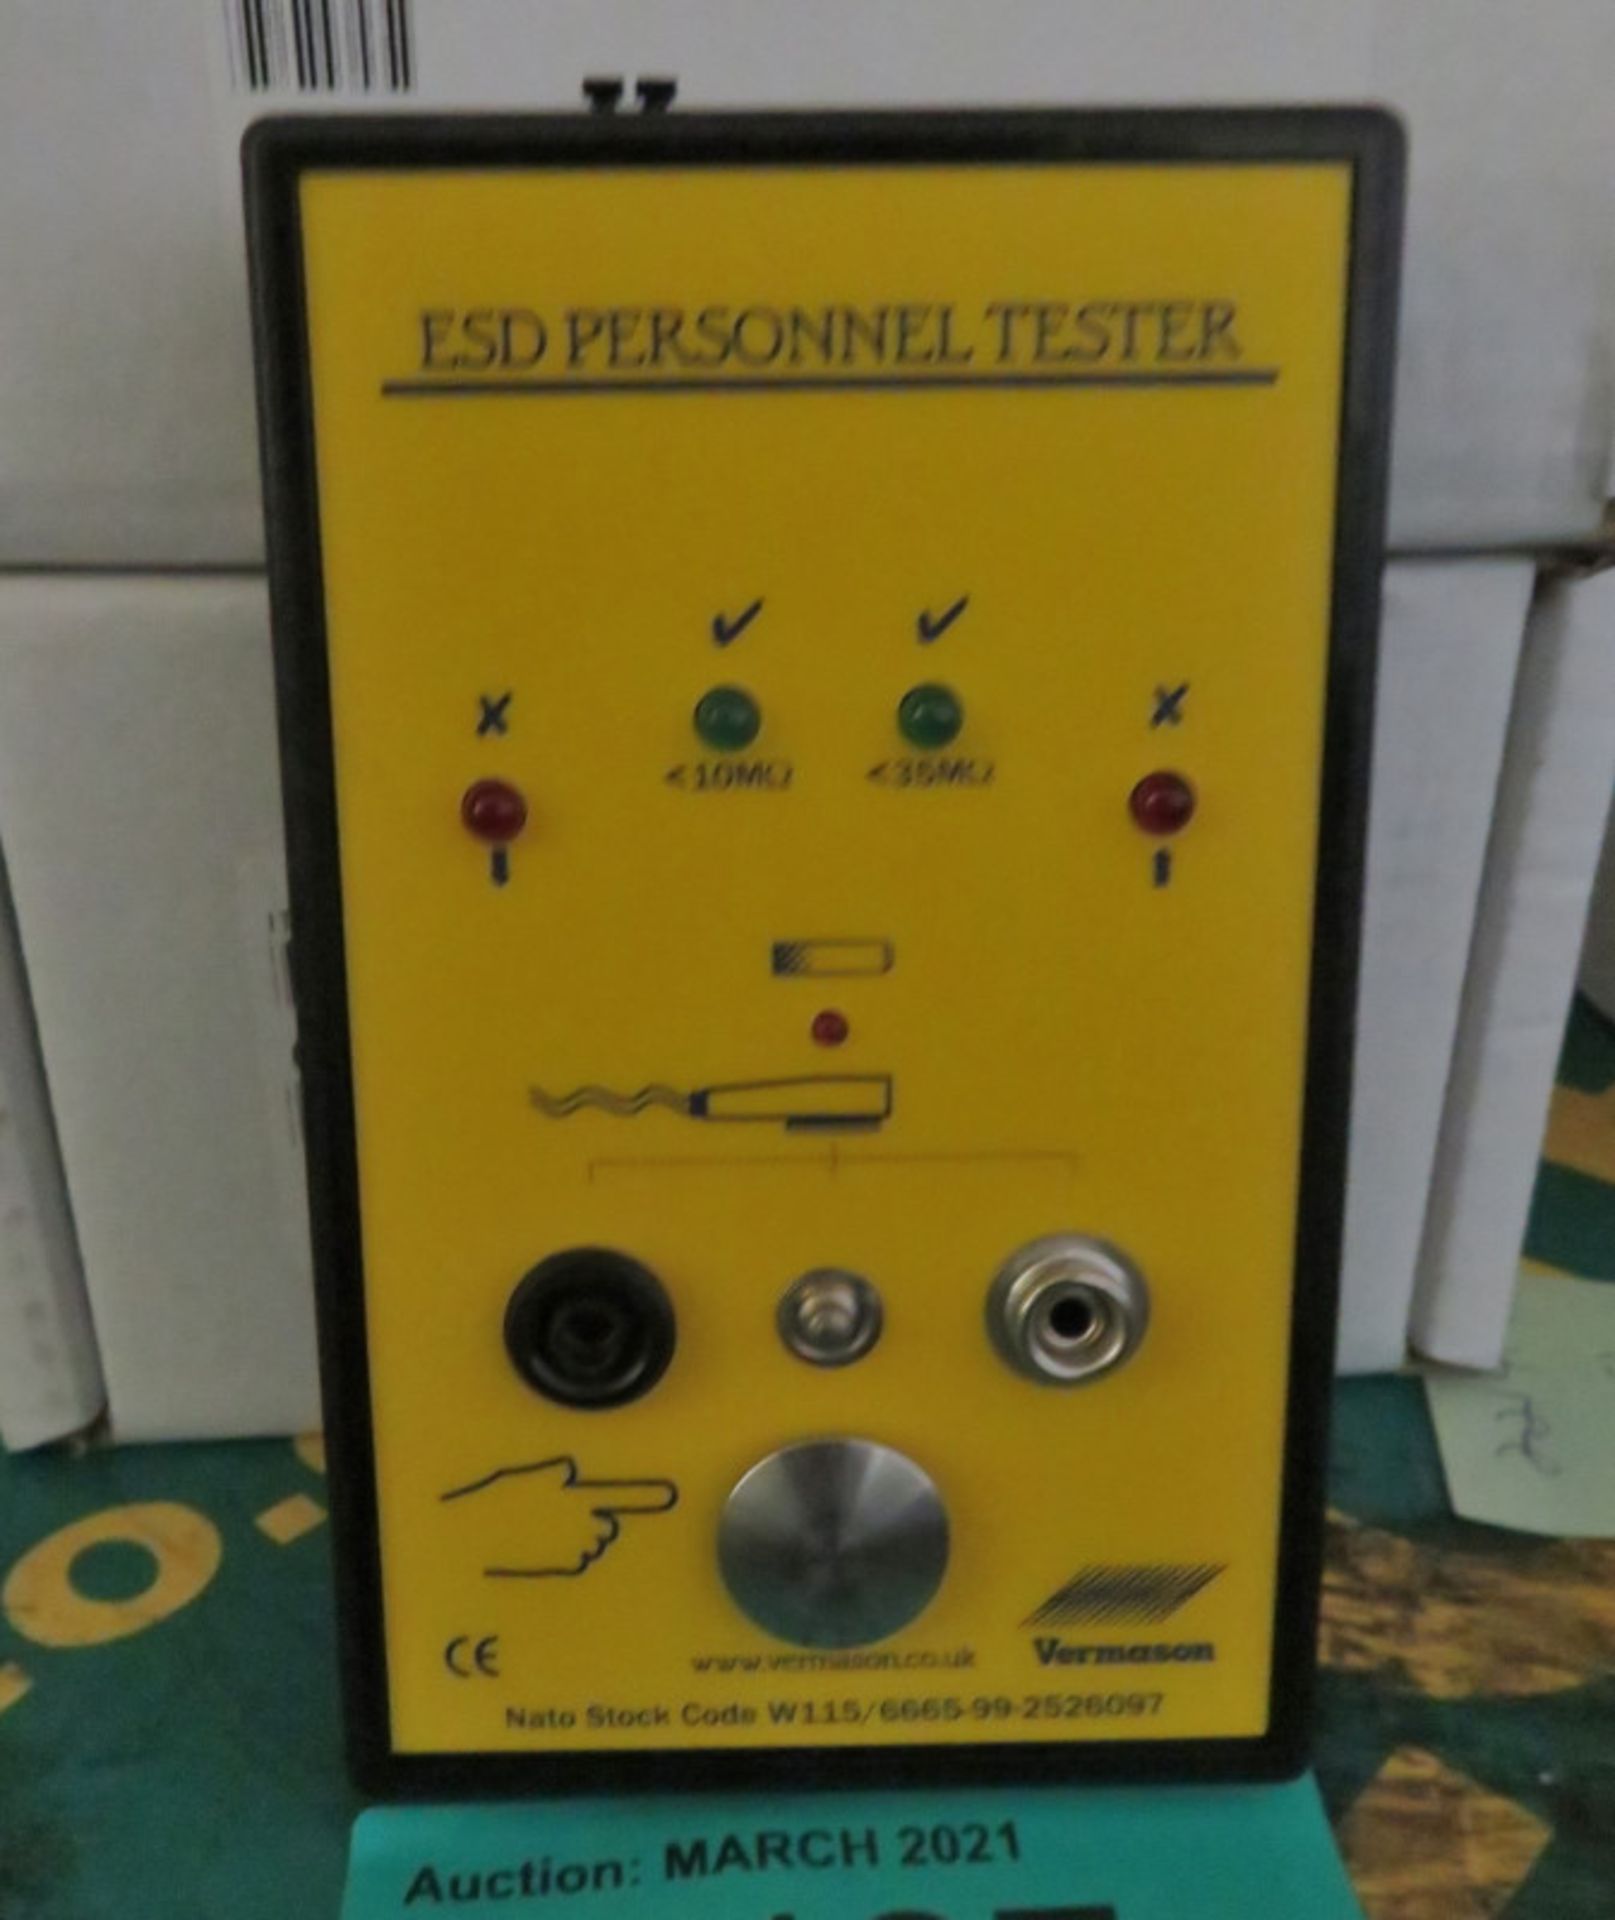 10x Vermason ESD Personal Tester Unit - Image 2 of 2